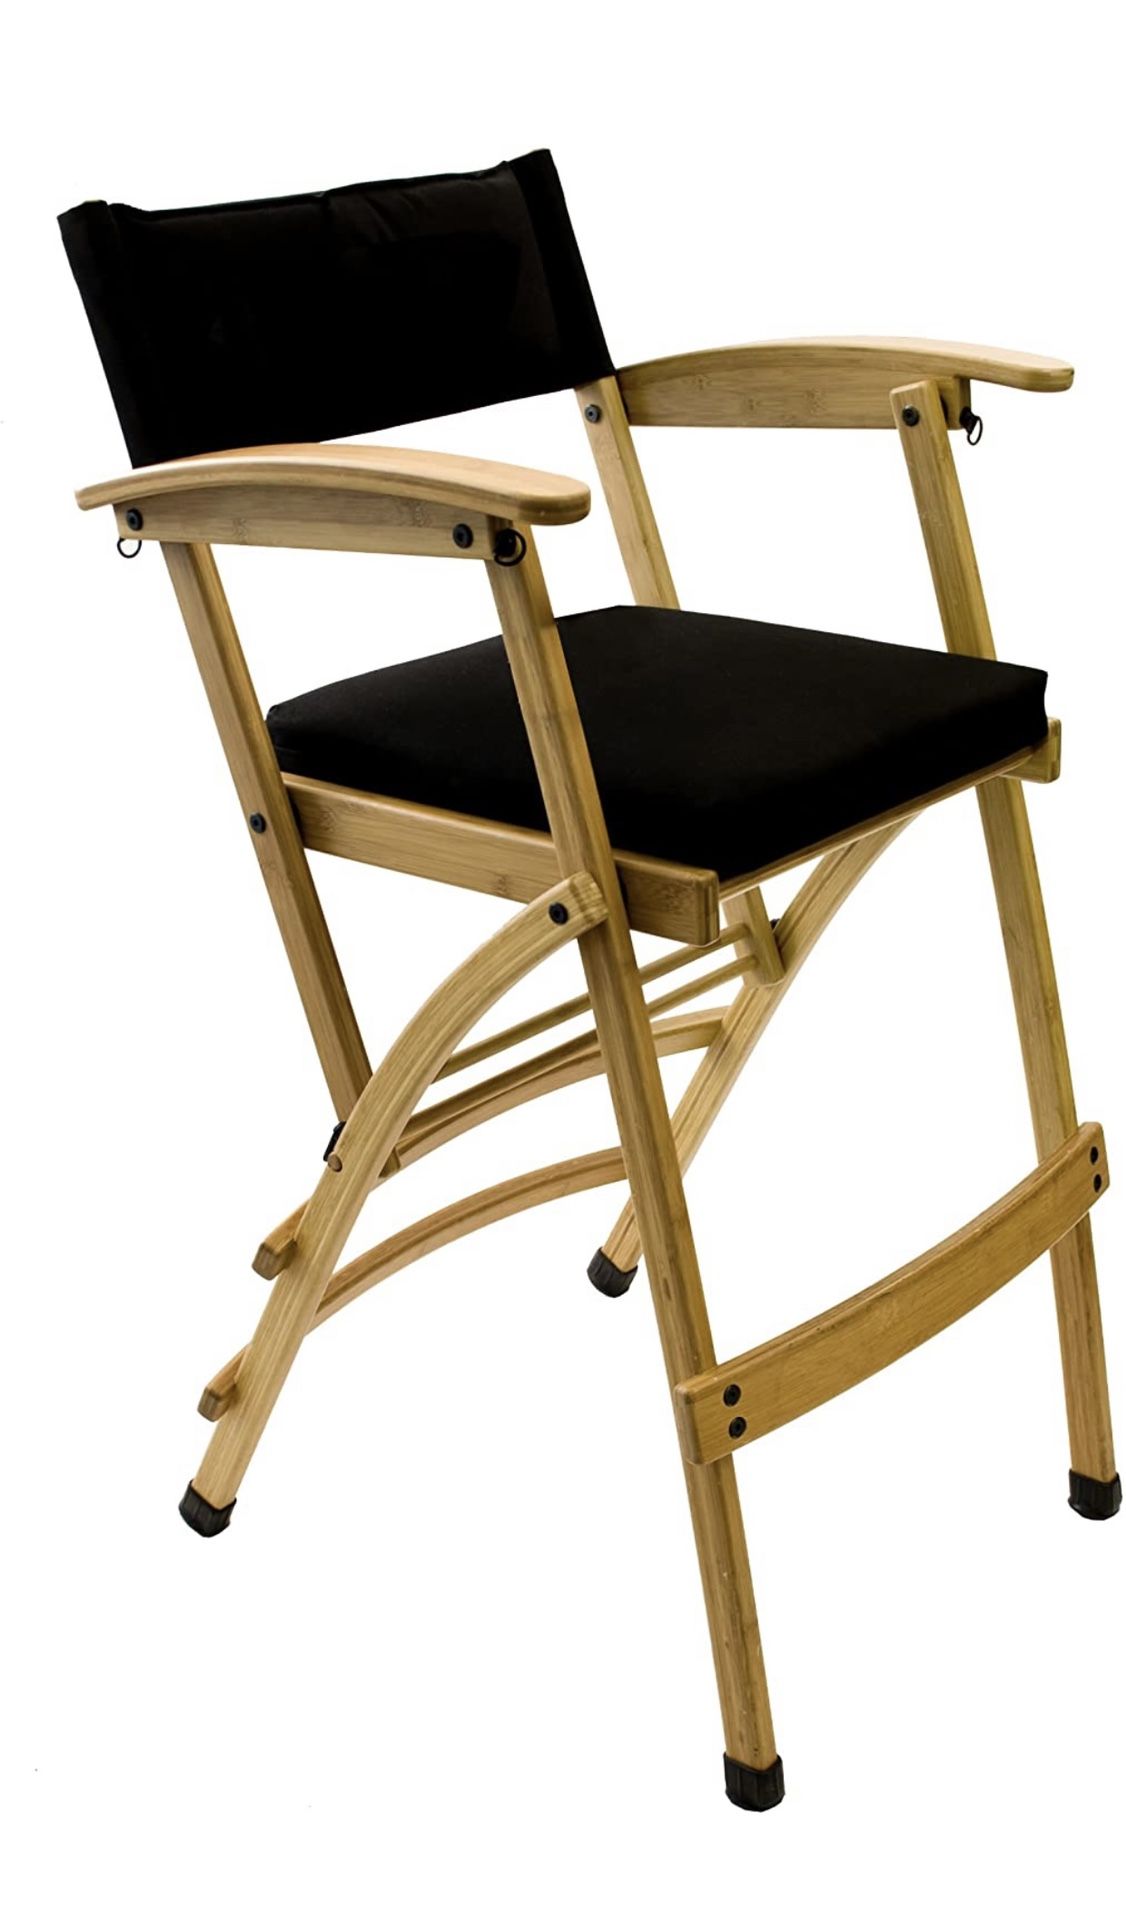 32” Deluxe Hollywood Bamboo Directors Chairs - Captains Chairs / Bar Chairs / Stools (2 Available)